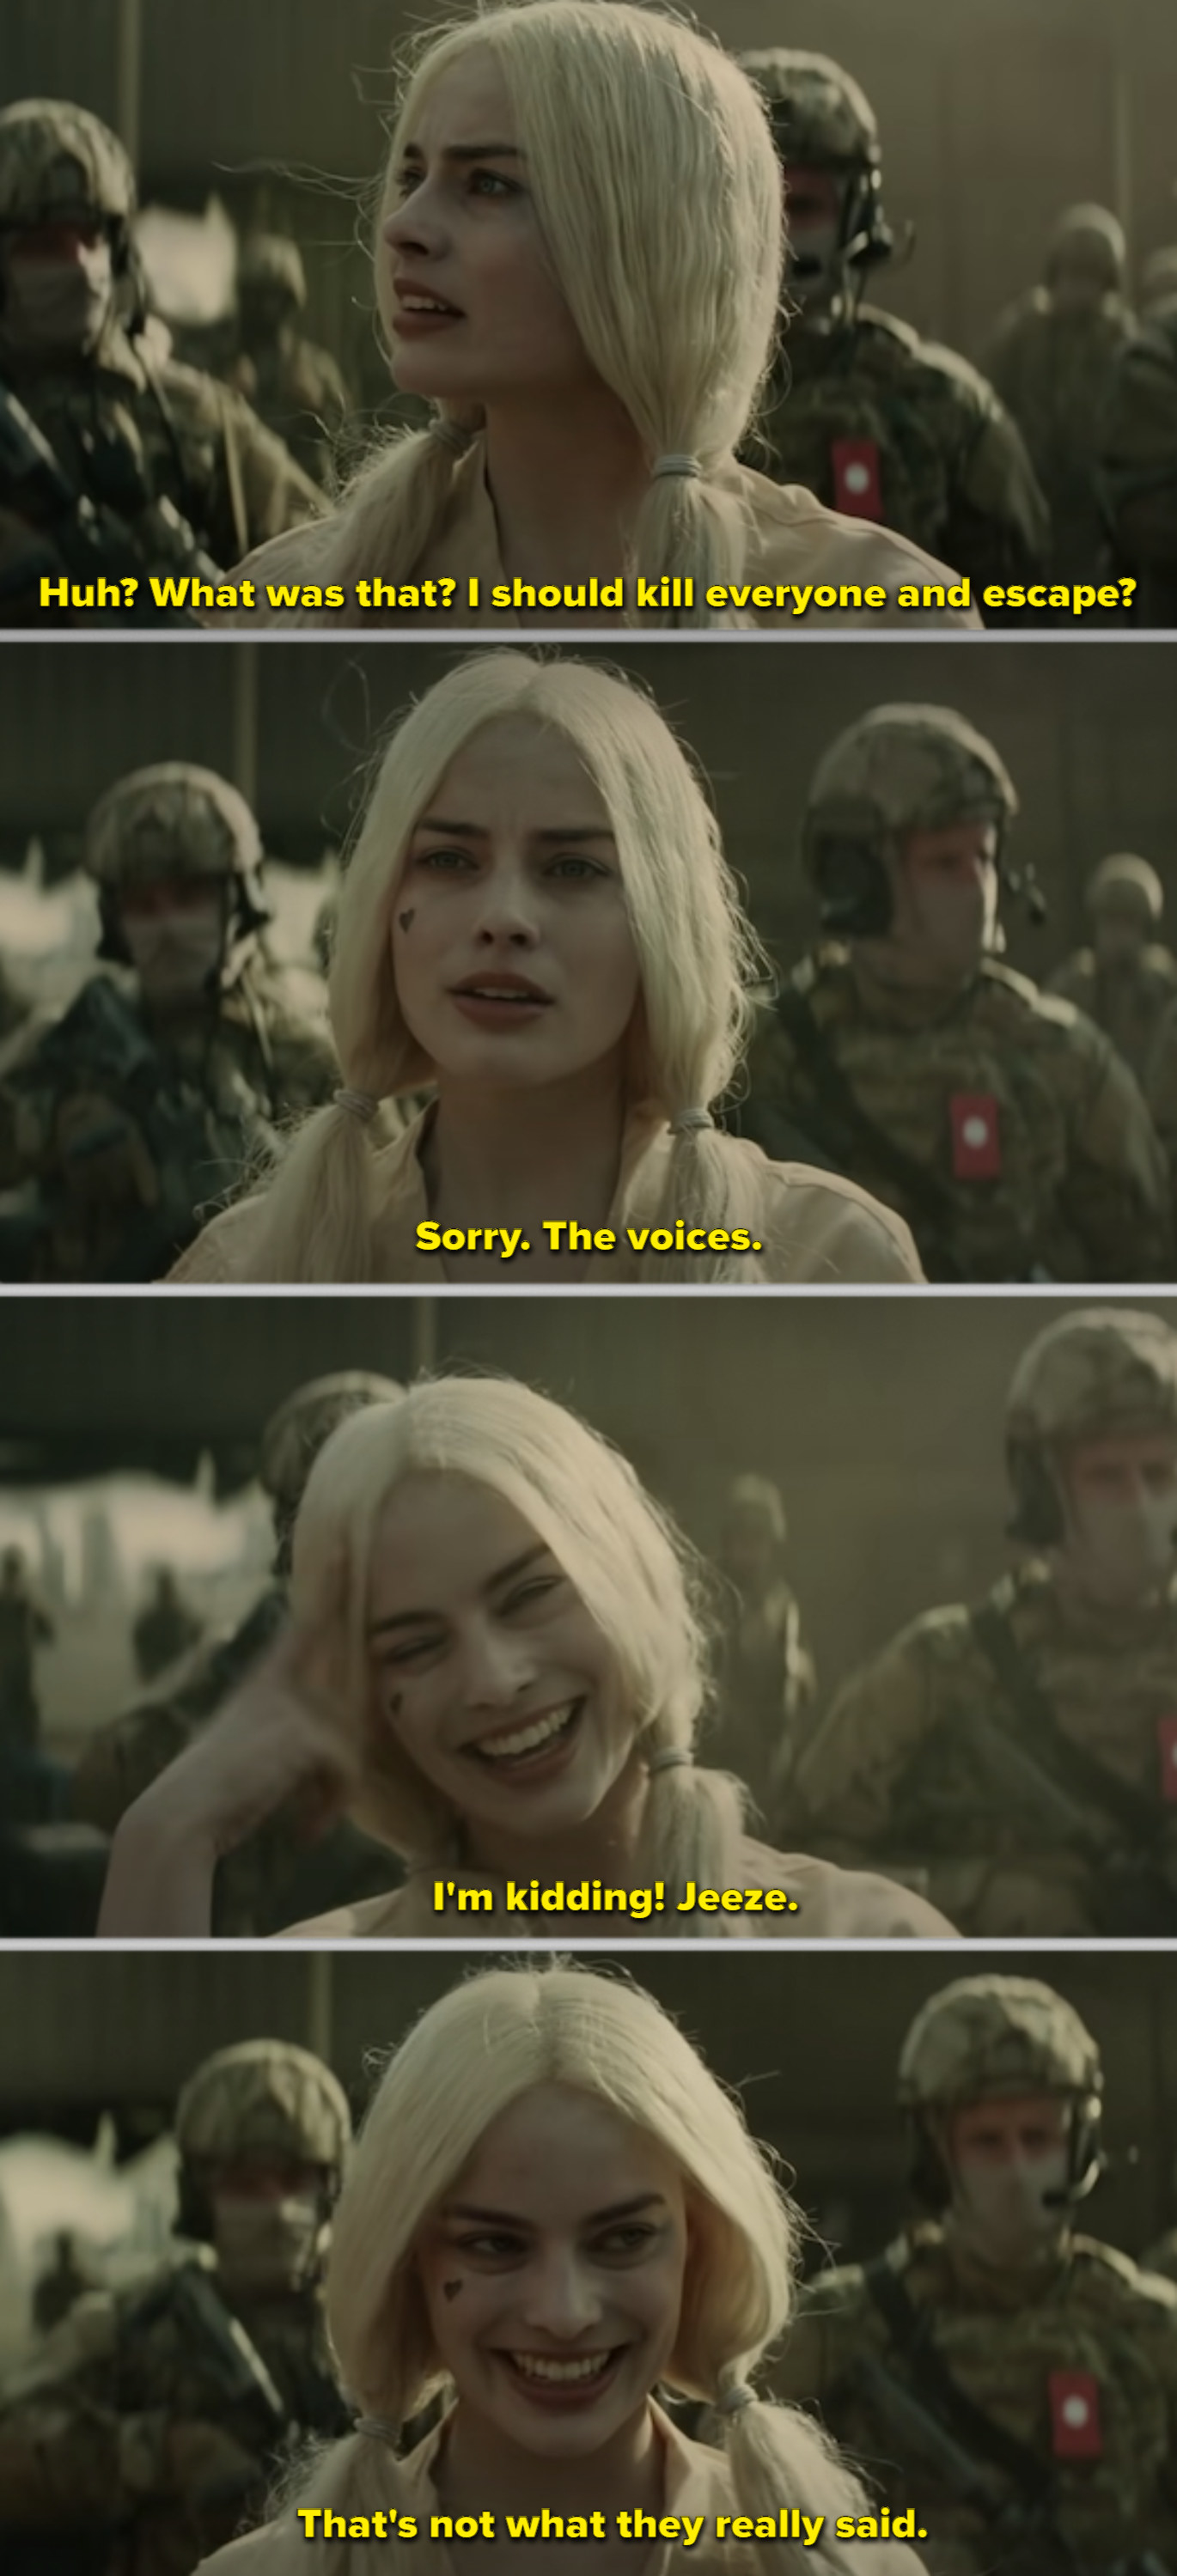 Harley Quinn talking to the soldiers